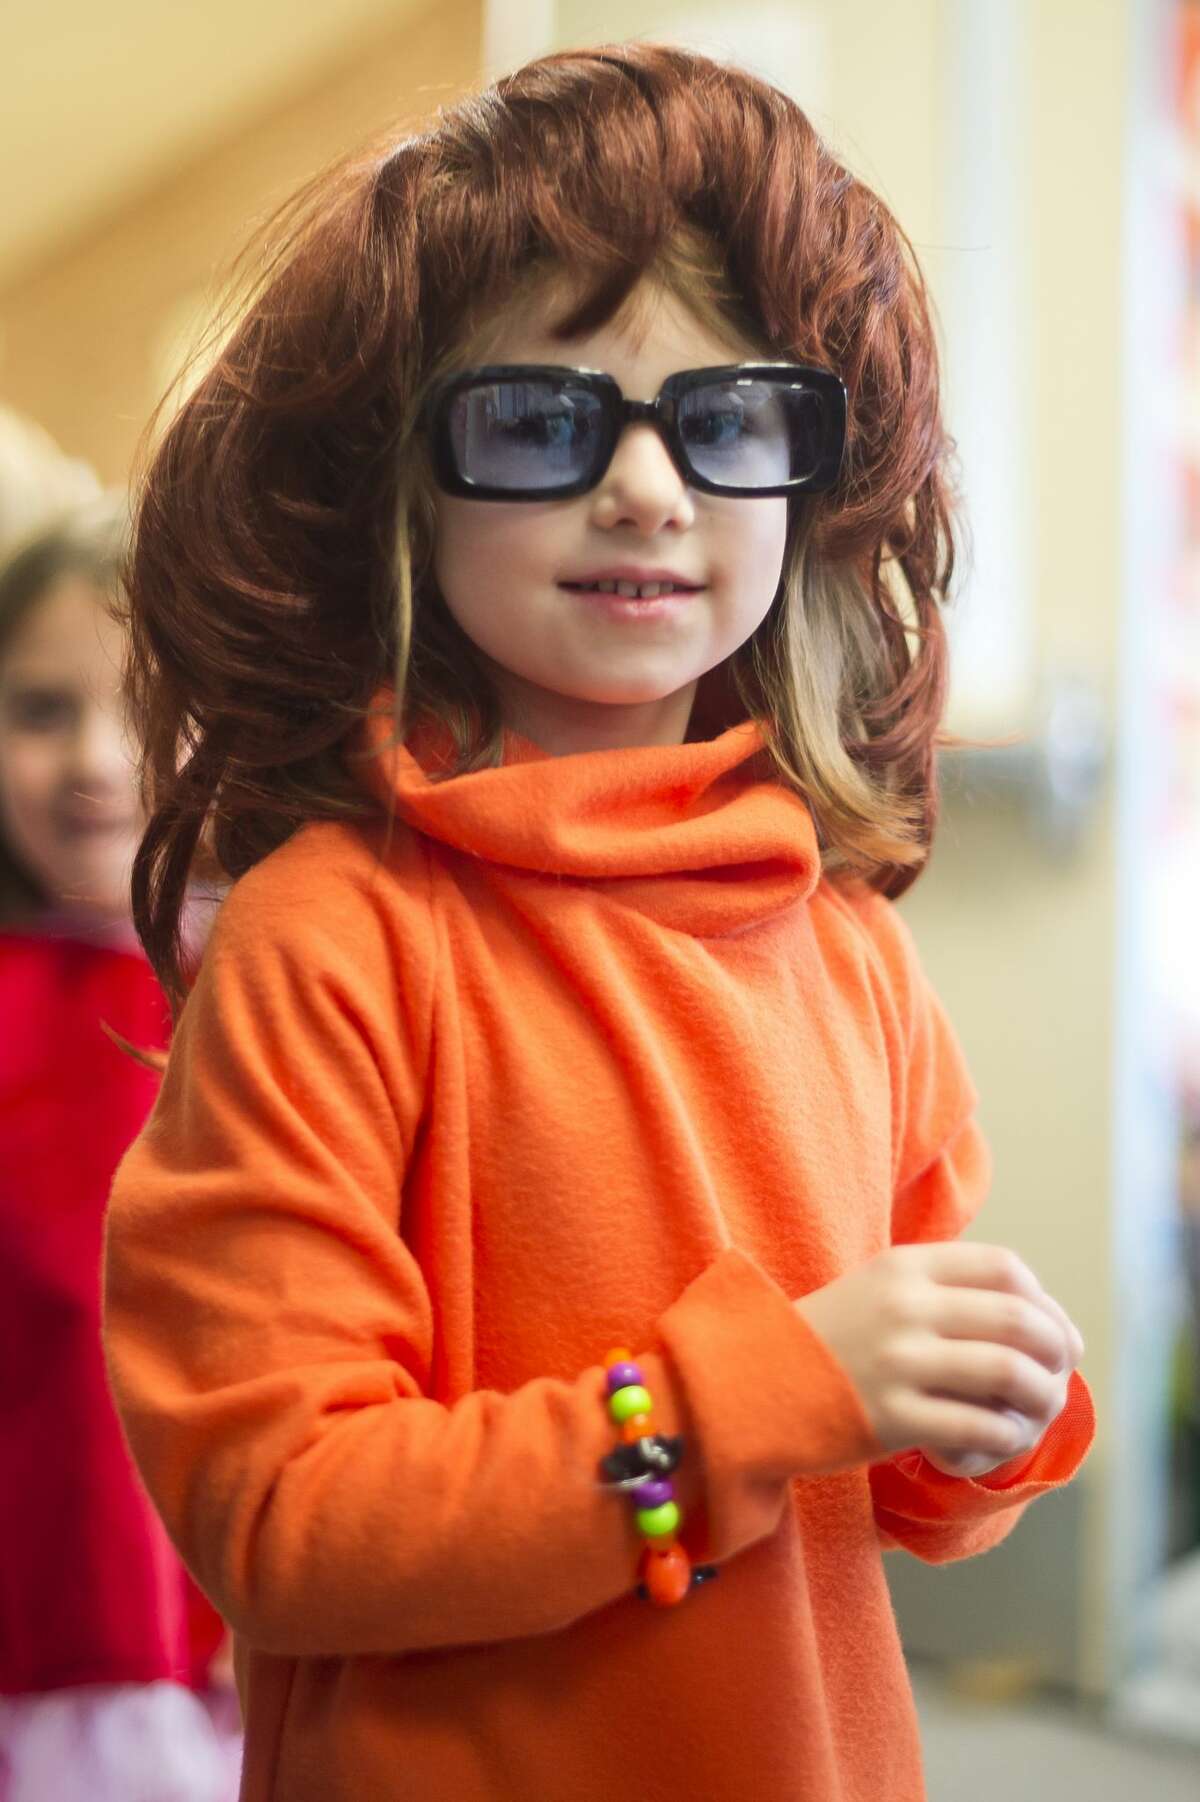 Students and faculty at Adams Elementary take a break from class to parade through the halls in their Halloween costumes on Tuesday, Oct. 31, 2017. (Katy Kildee/kkildee@mdn.net)